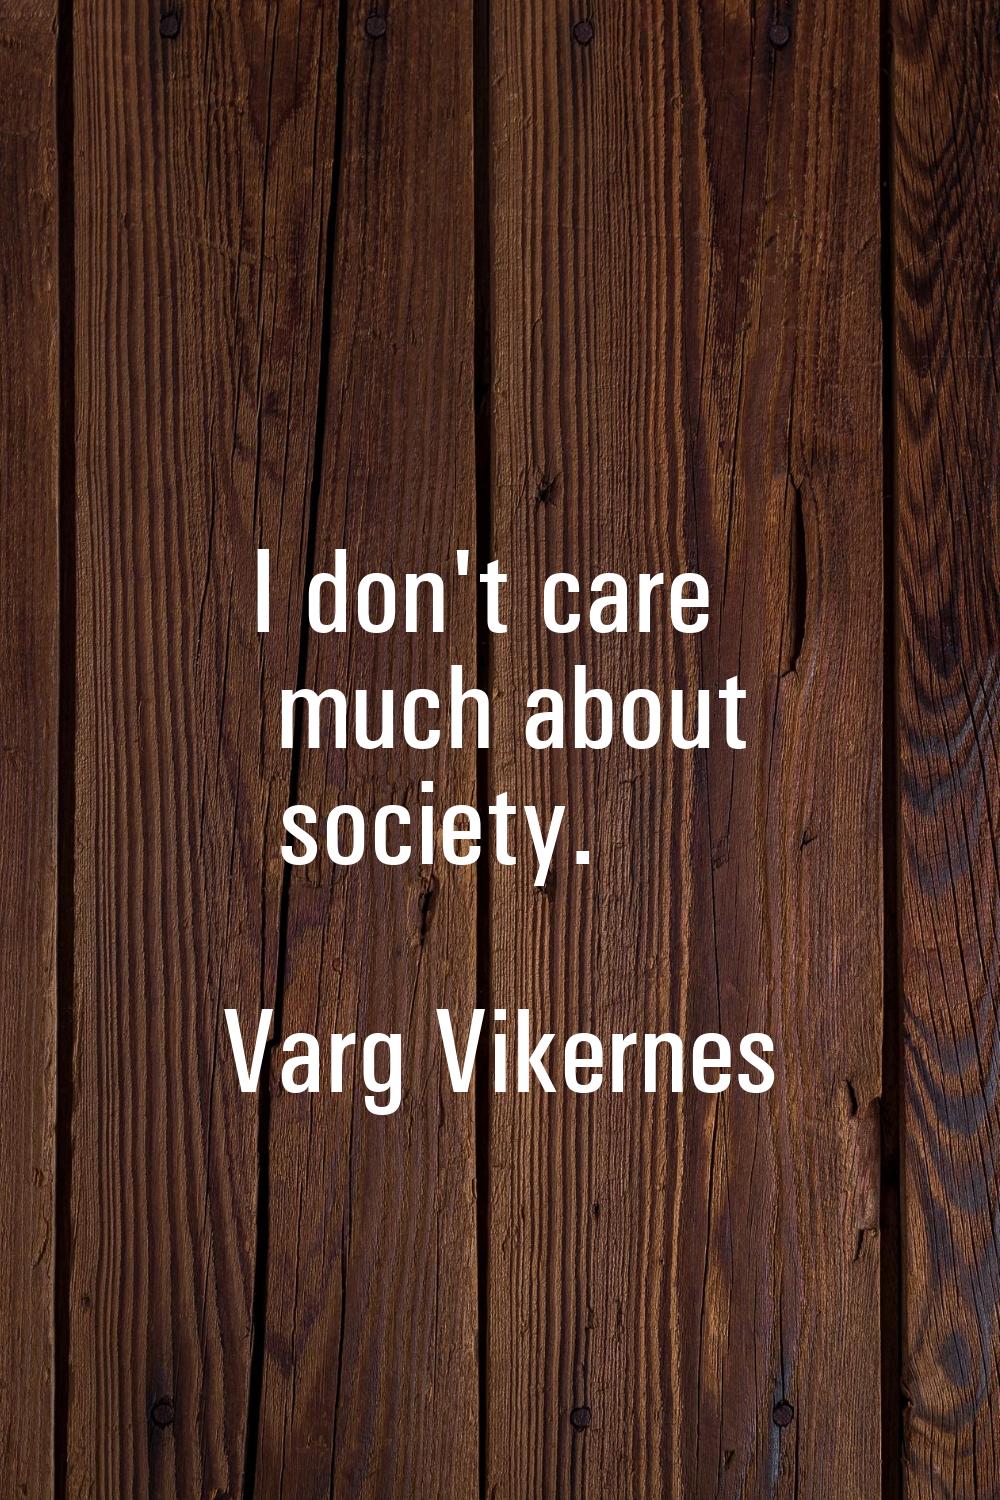 I don't care much about society.